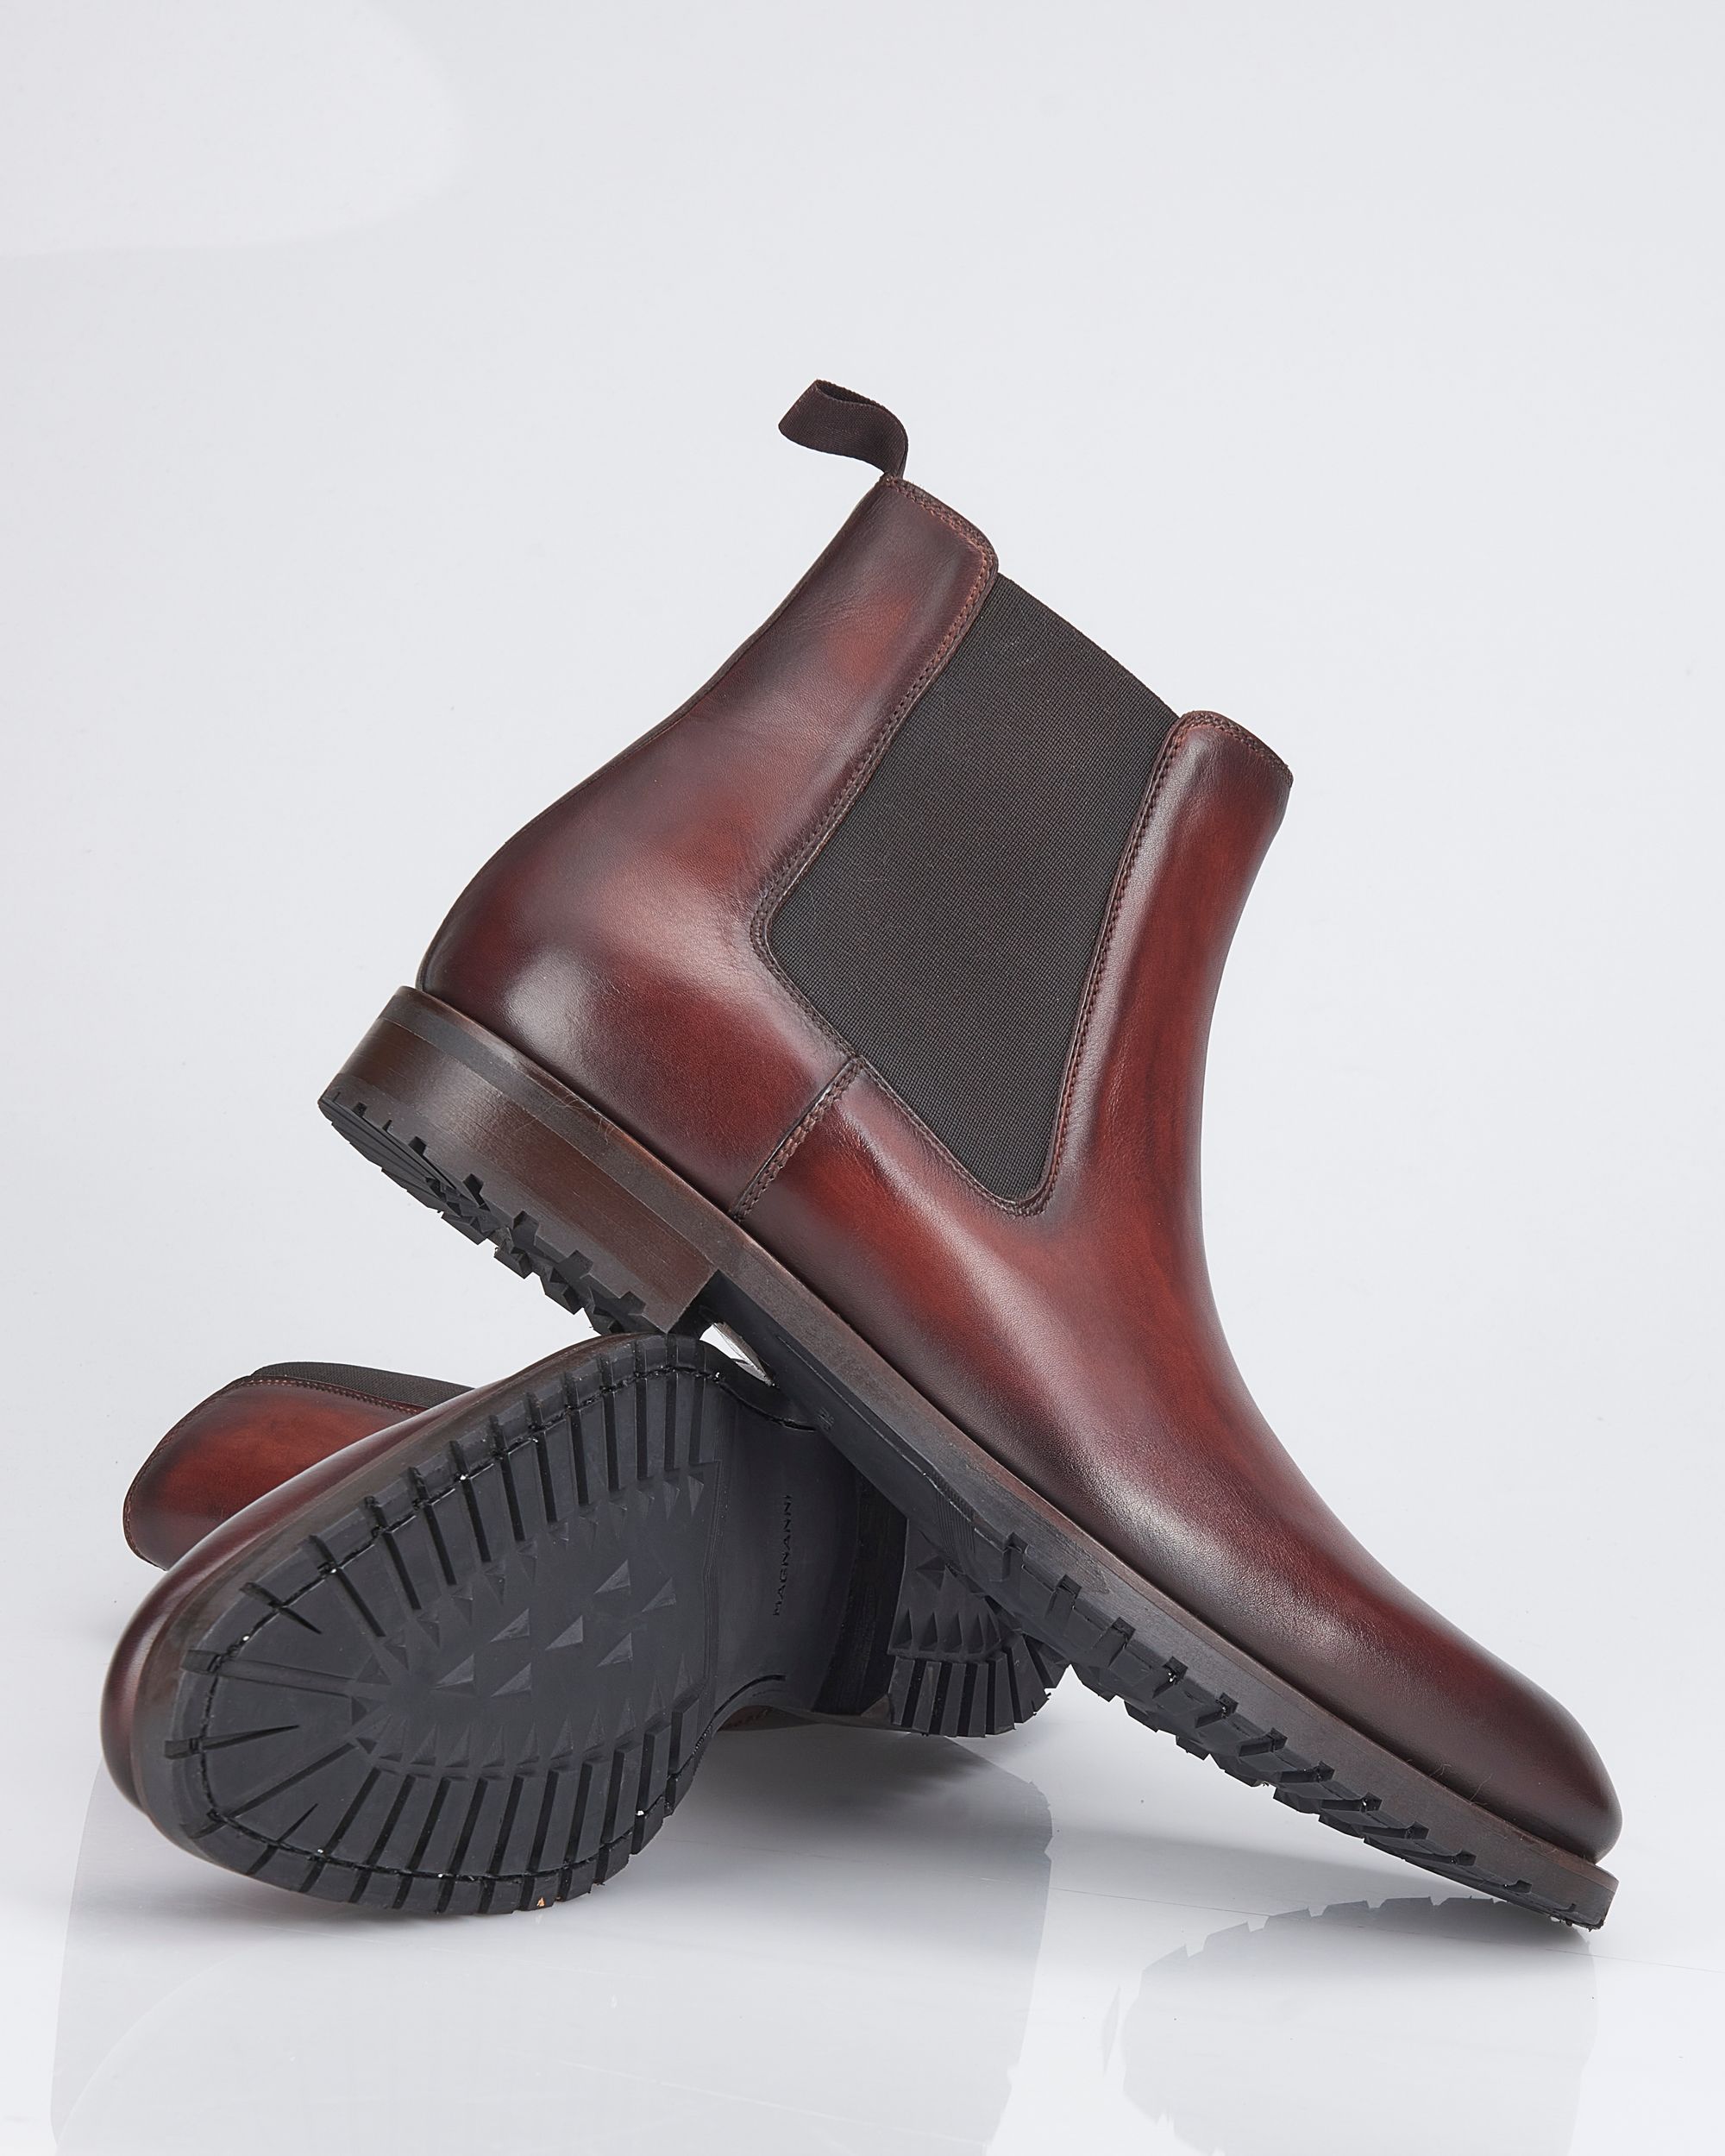 Magnanni Boots Donker bruin 086801-001-41